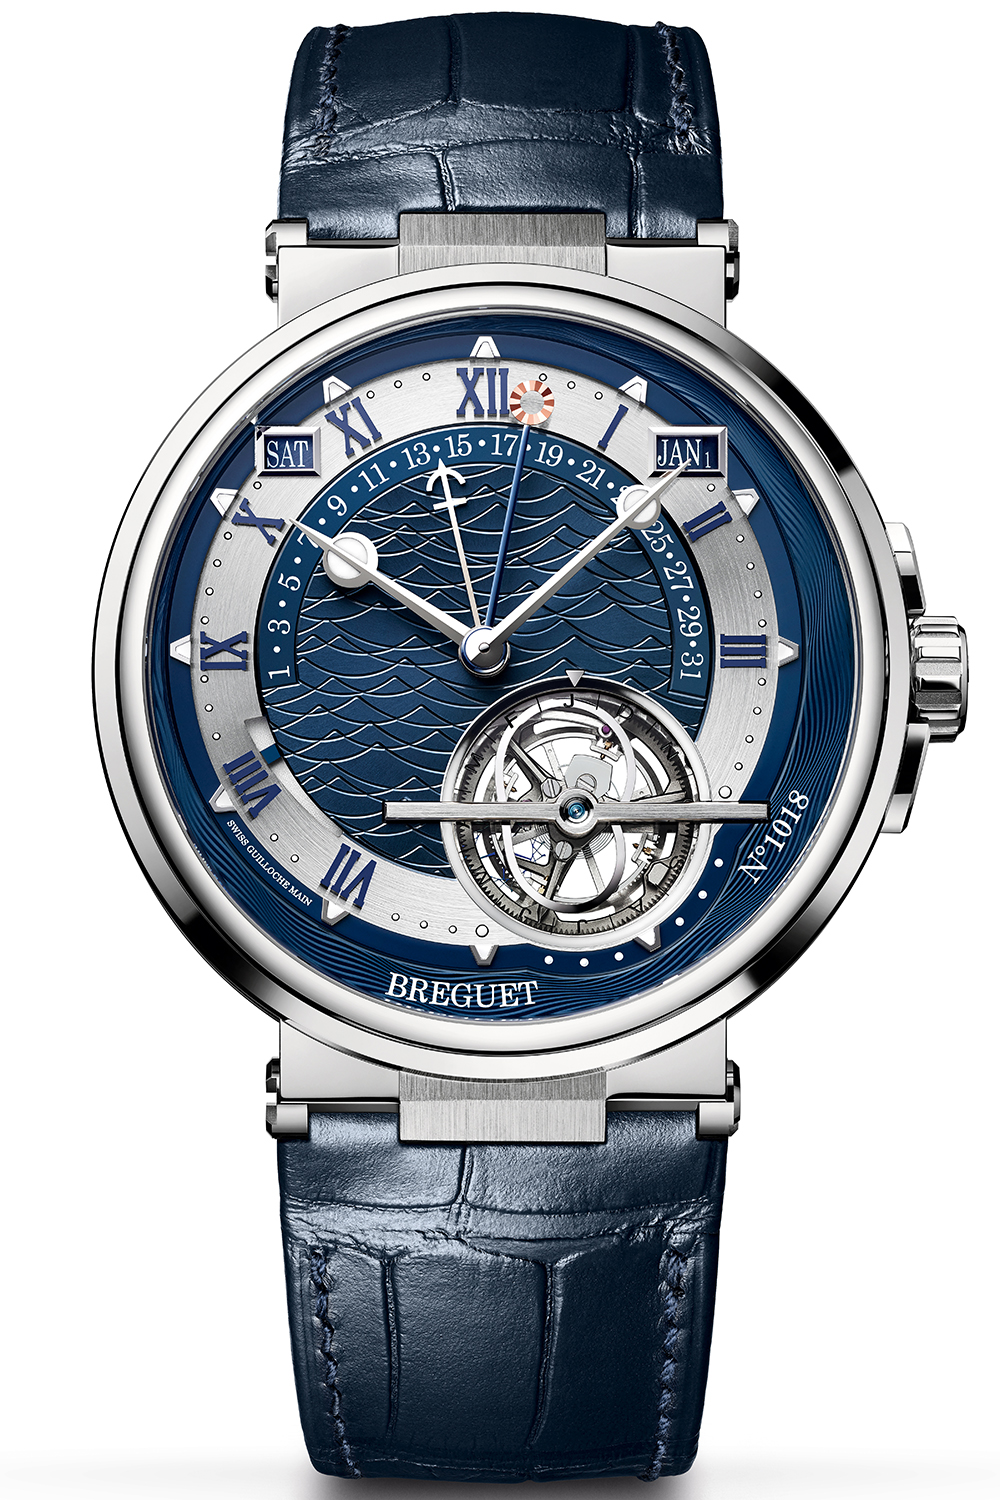 It’s Tourbillon Day! Check Out These 12 Intriguing Tourbillon Watches Launched This Year